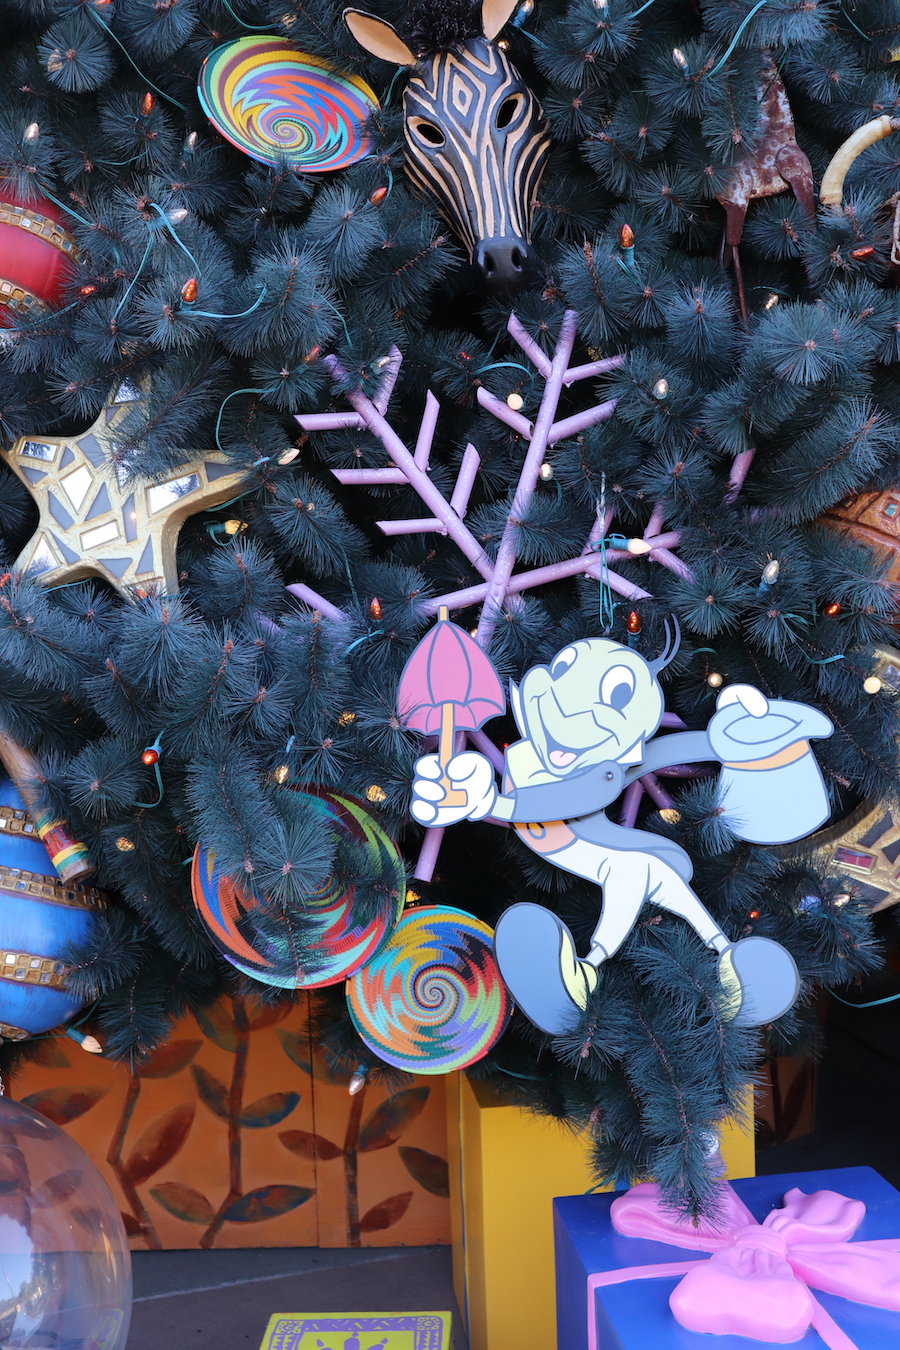 Unique and Eclectic Ornaments on Animal Kingdom's Christmas Tree